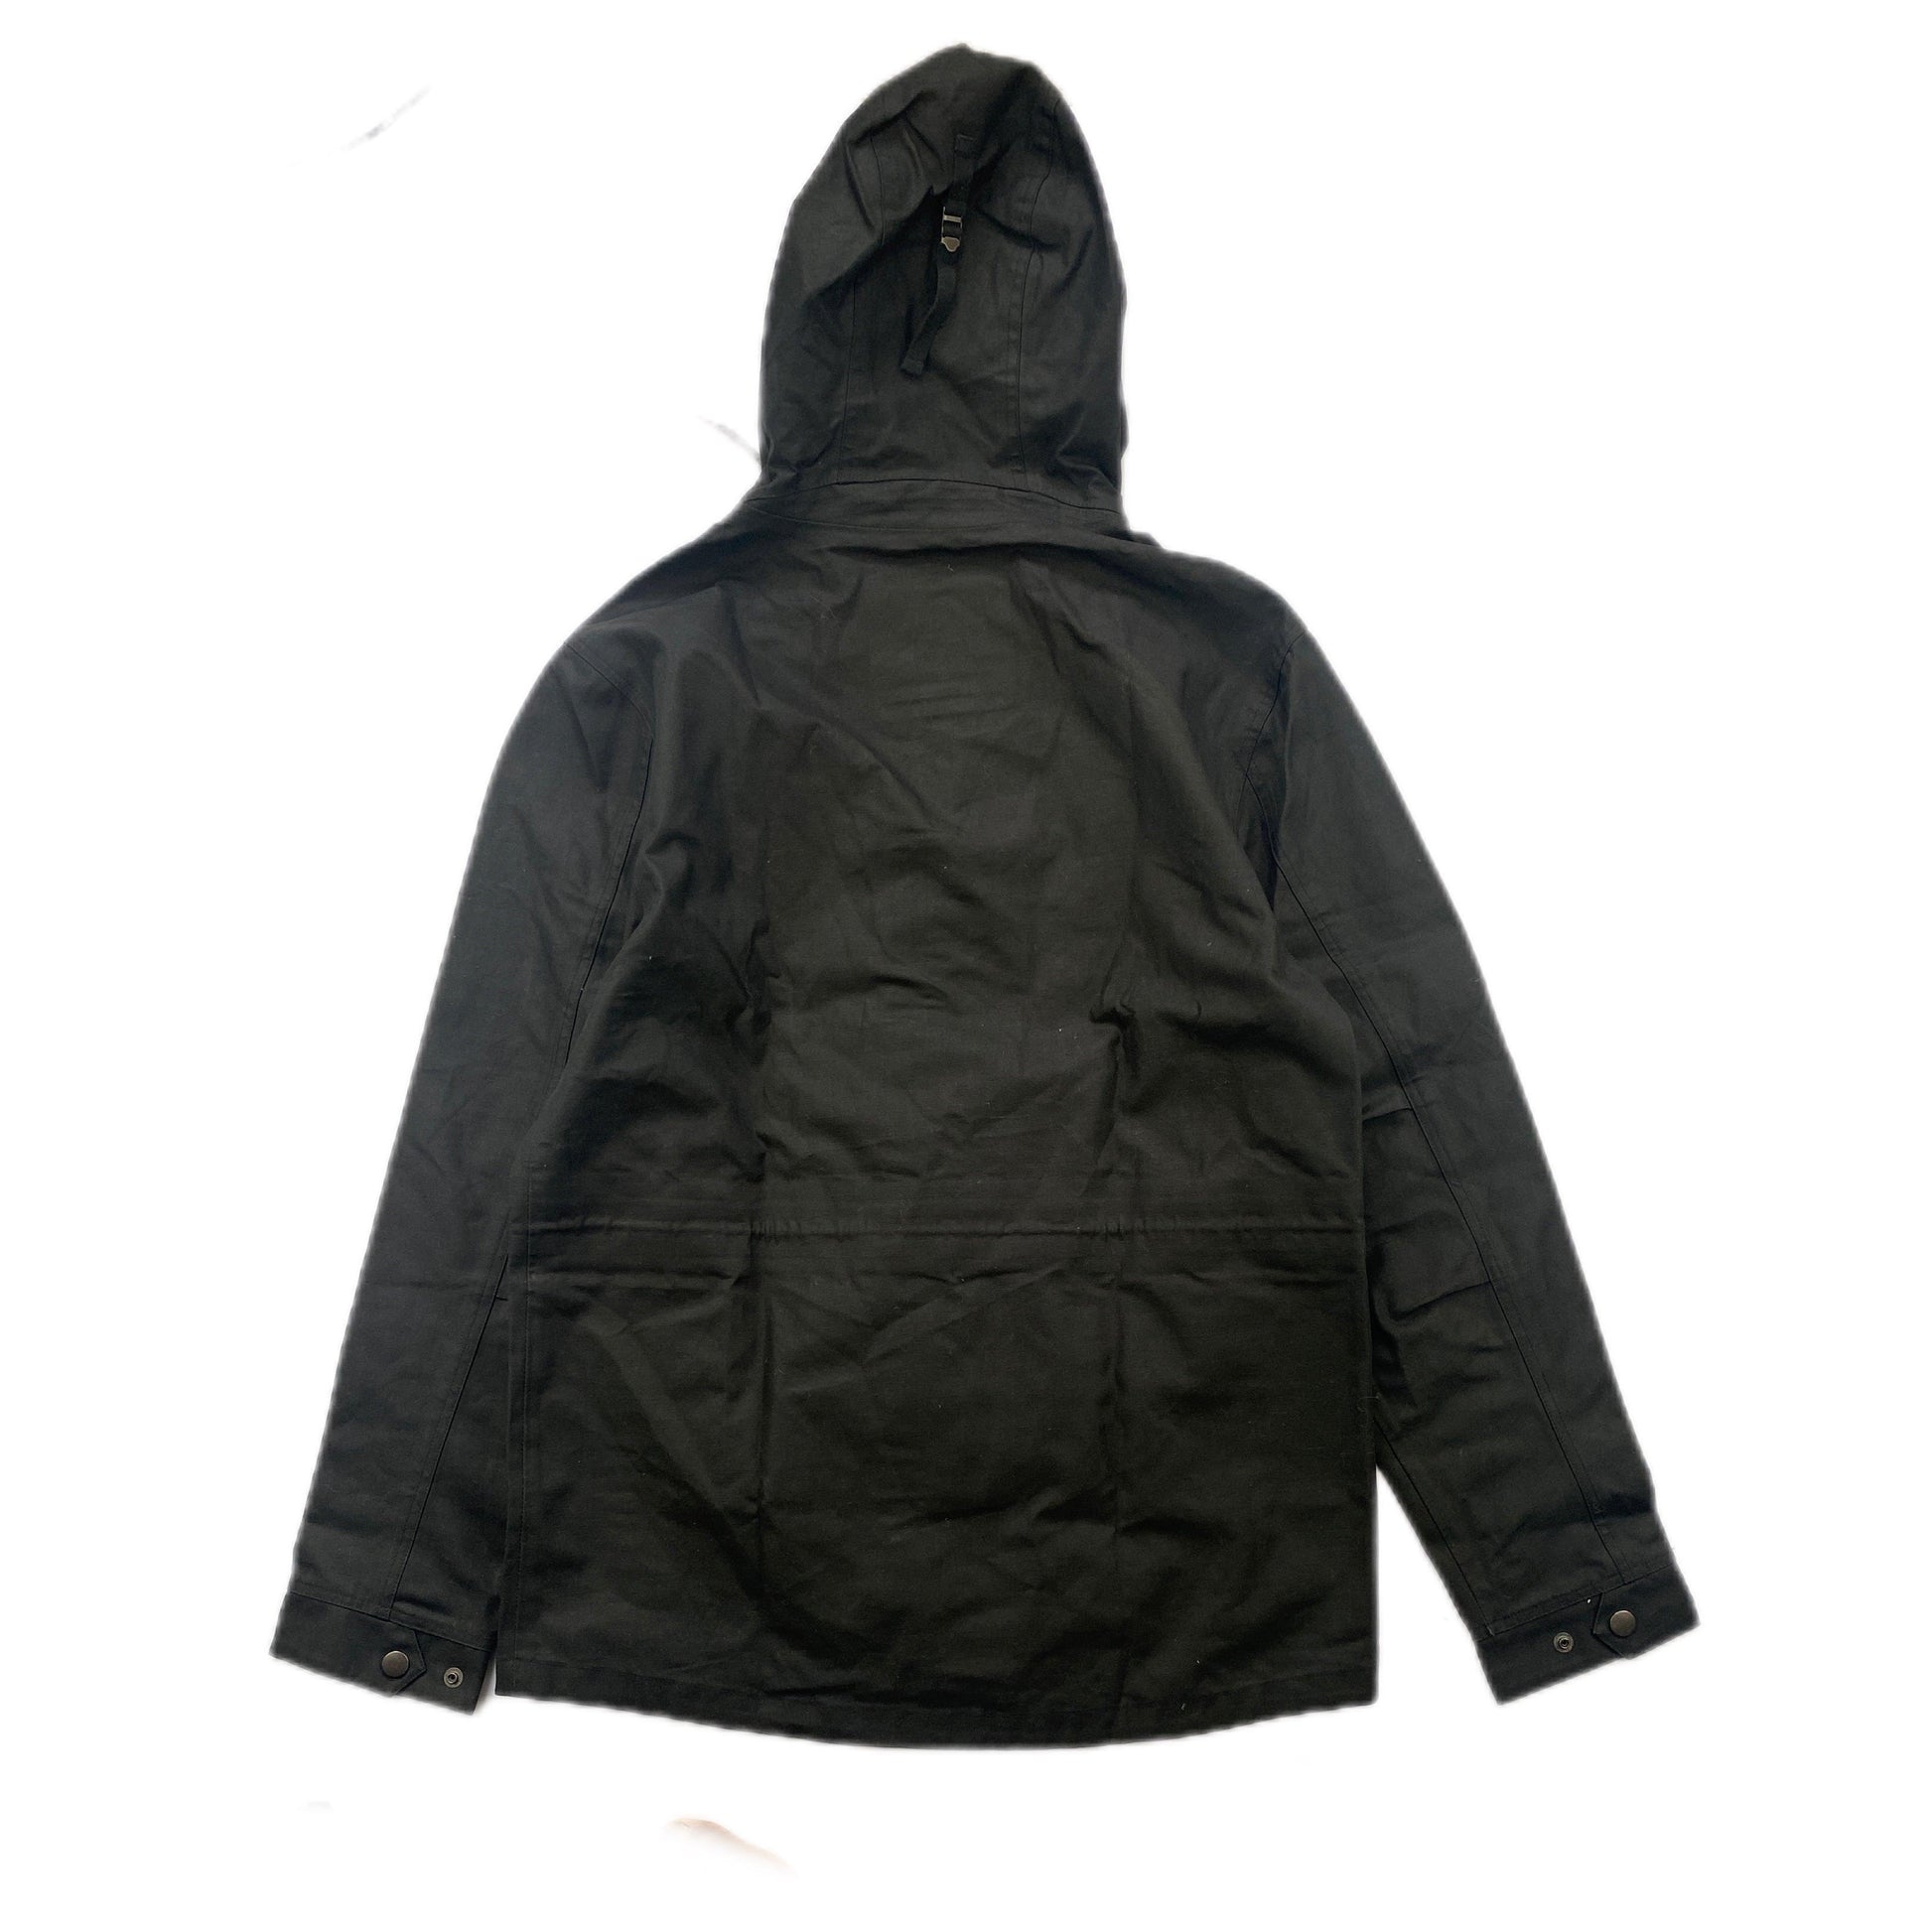 STUSSY x HOLDEN 2012 COLLAB JACKET (M) - Known Source